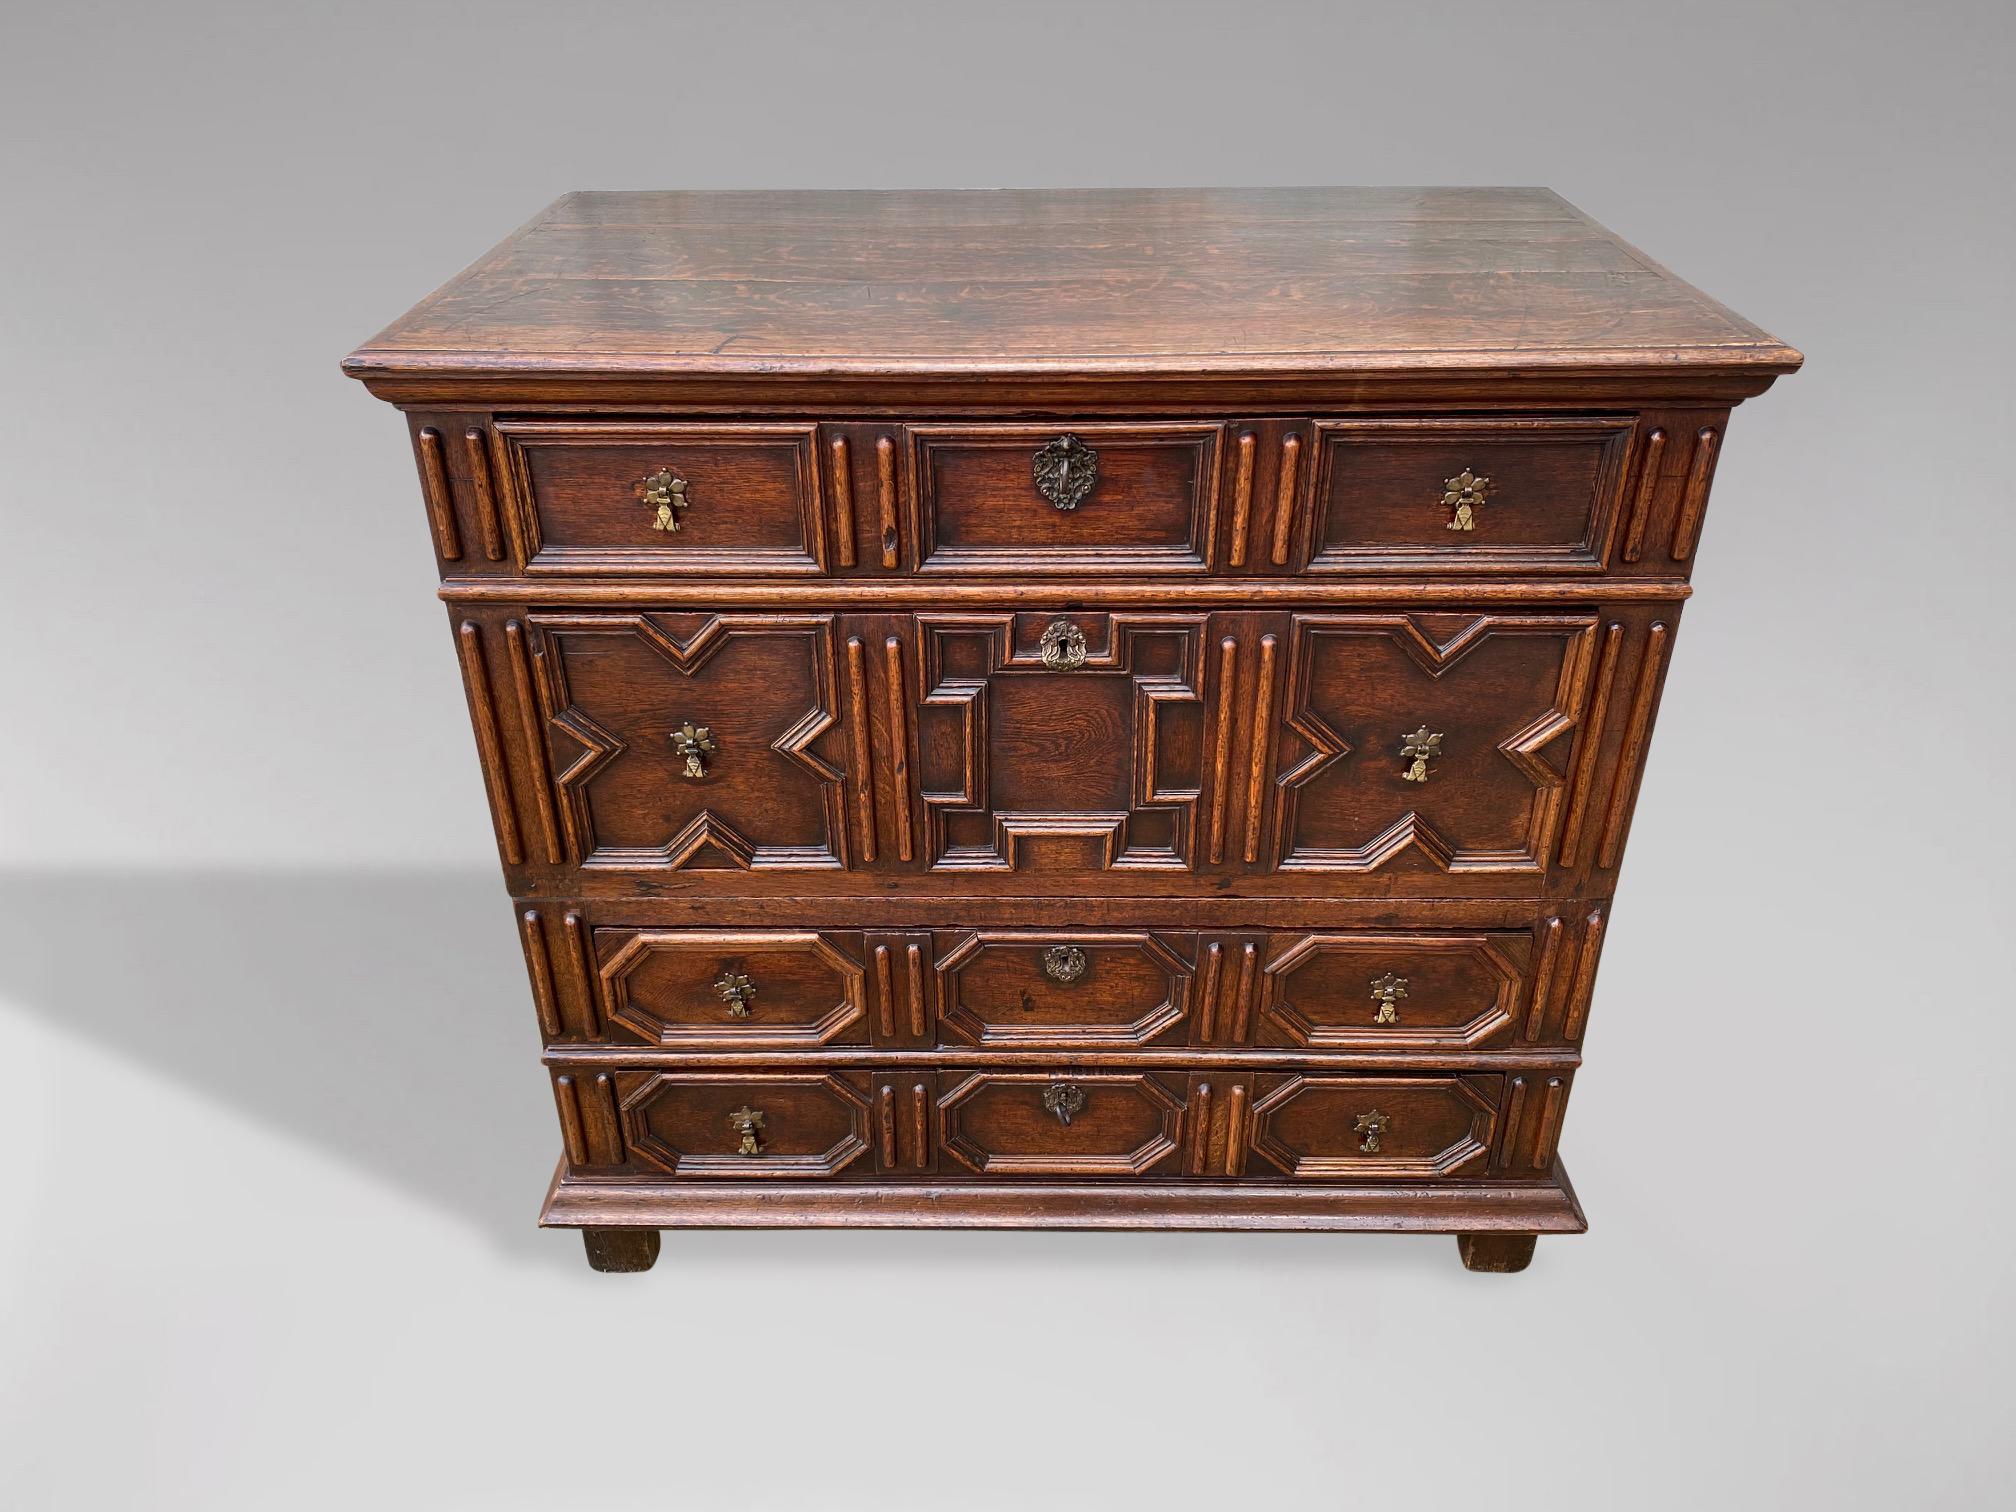 British 17th Century Jacobean Charles II Oak Geometric Moulded Chest of Drawers